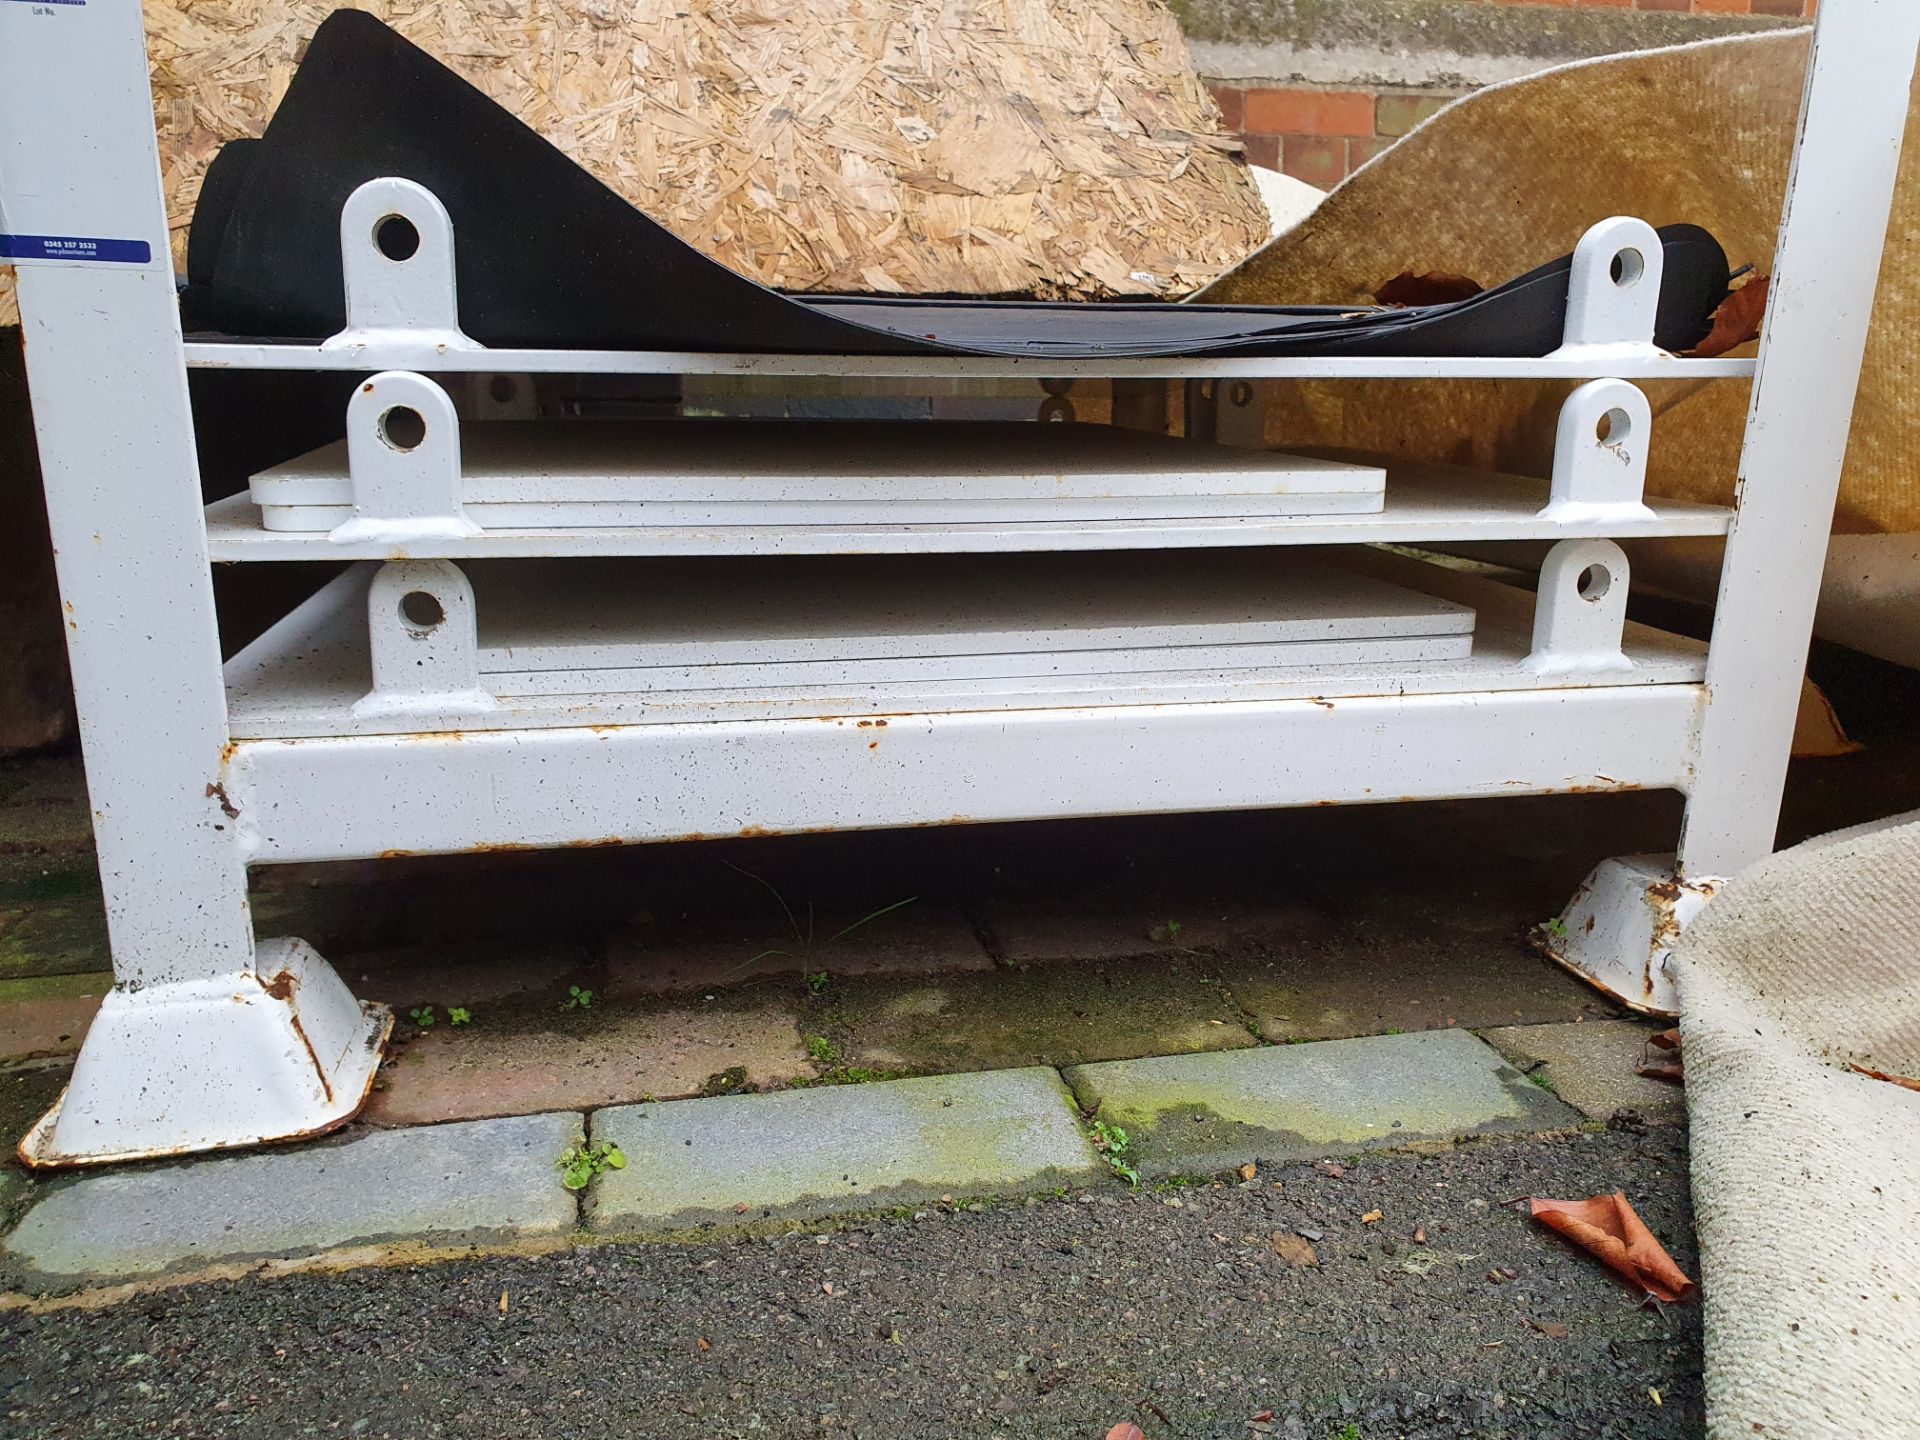 5 Stillages Containing Plates & Trays for External Cube Ballast System - CL573 - Location: Leicester